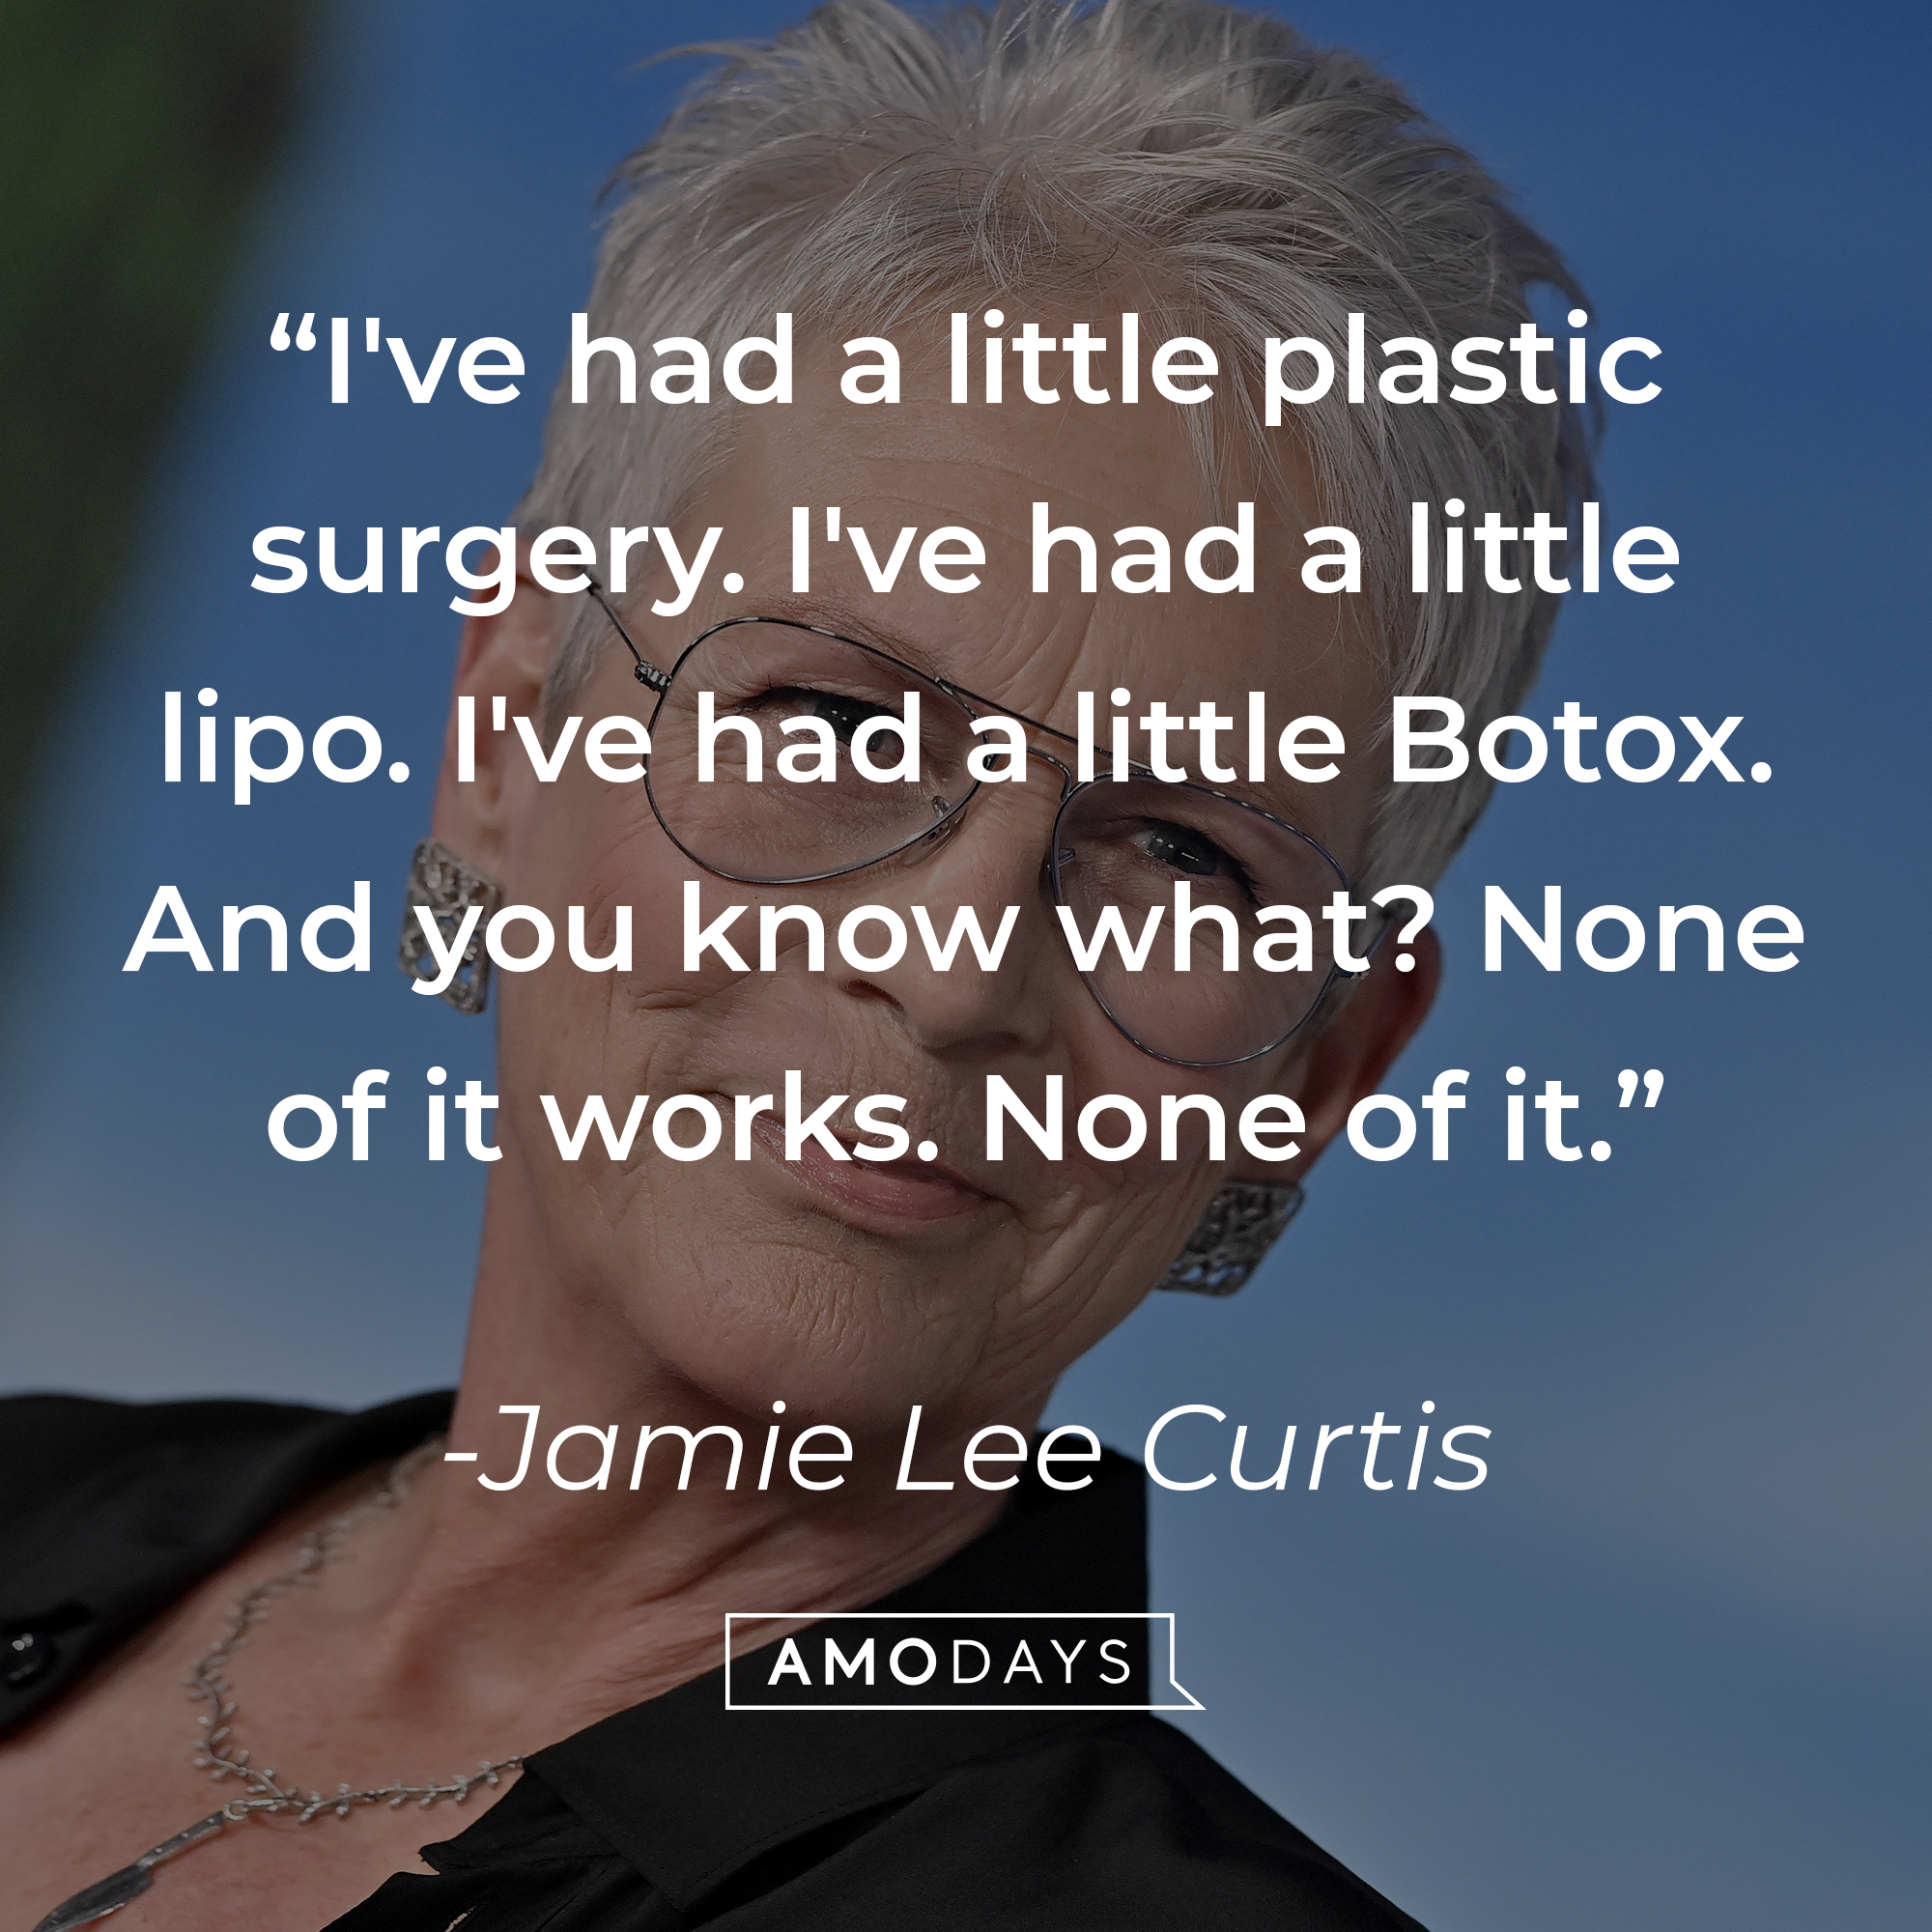 An image of Jamie Lee Curtis, with her quote: “I've had a little plastic surgery. I've had a little lipo. I've had a little Botox. And you know what? None of it works. None of it.” | Source: Getty Images